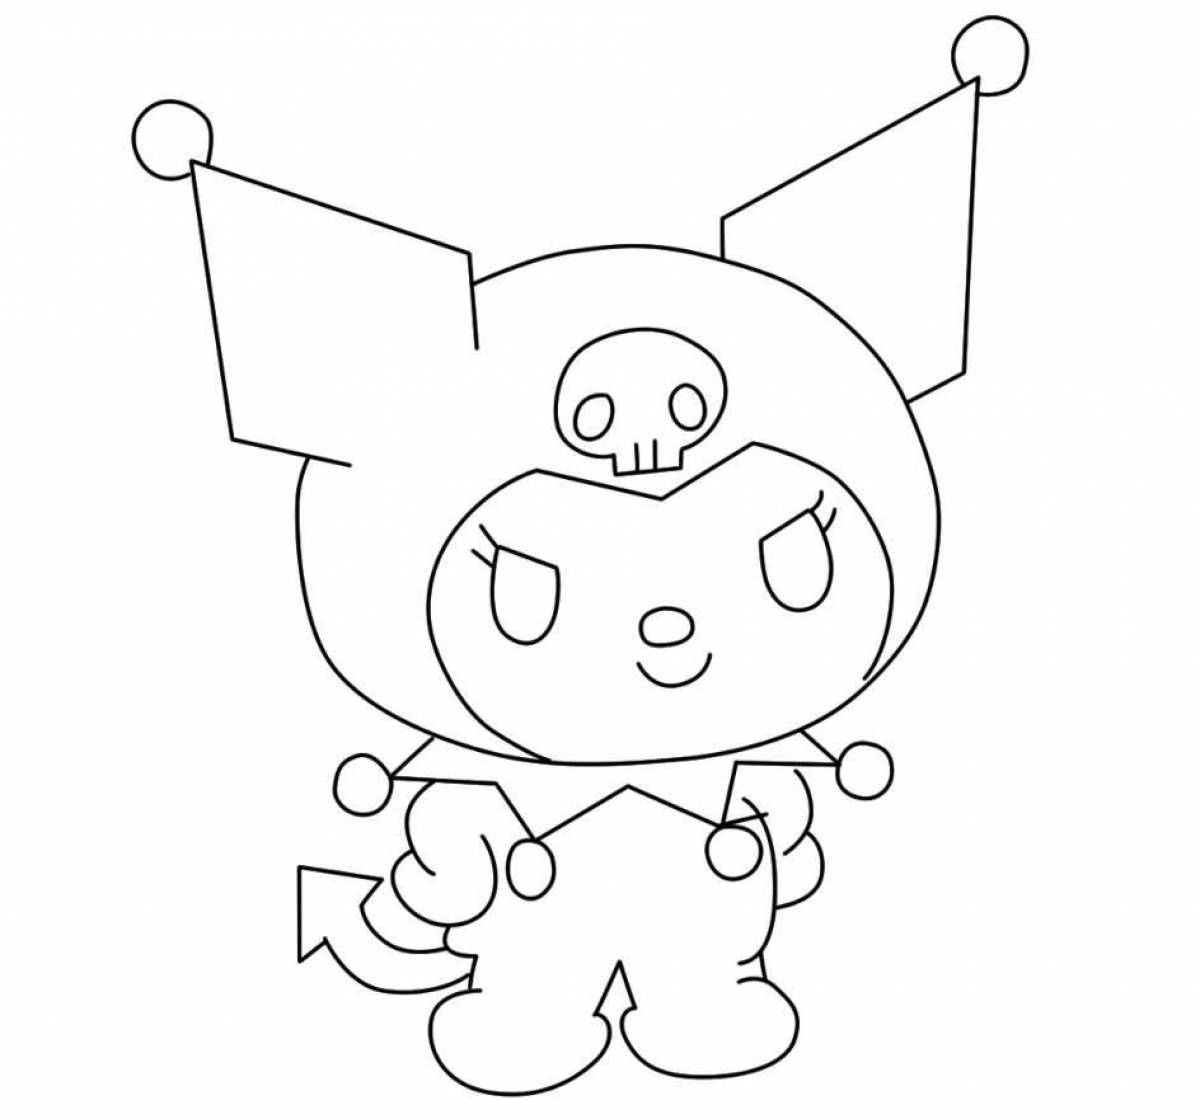 Colorful kuromi coloring page